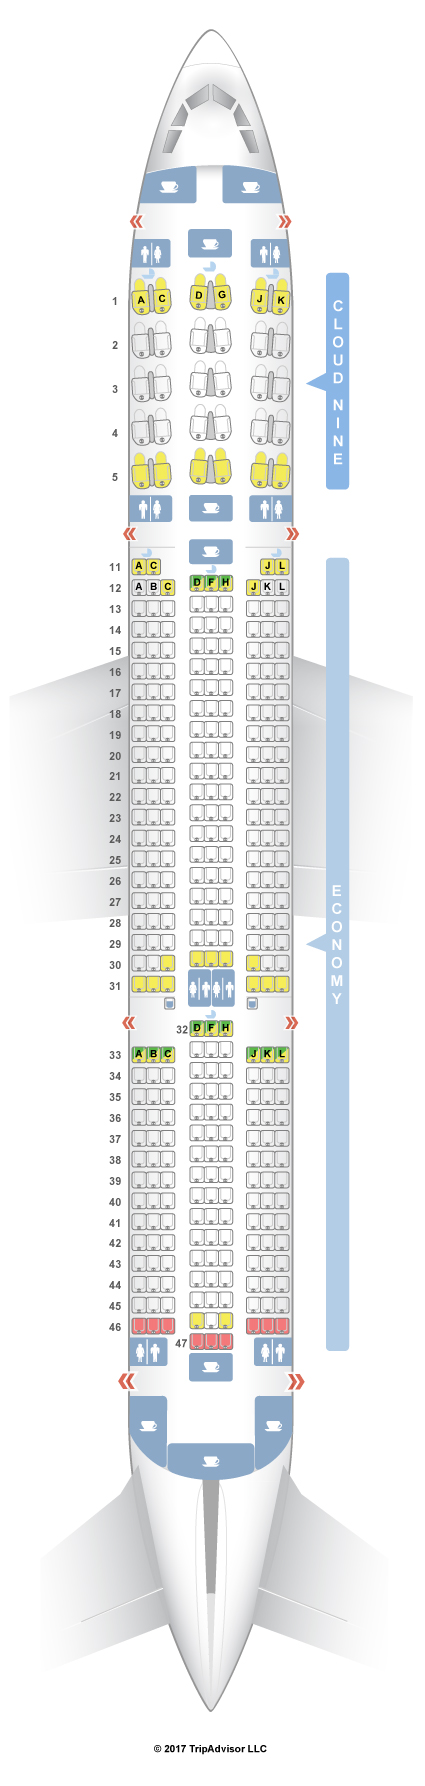 Ethiopian Airlines Flight 503 Seating Chart